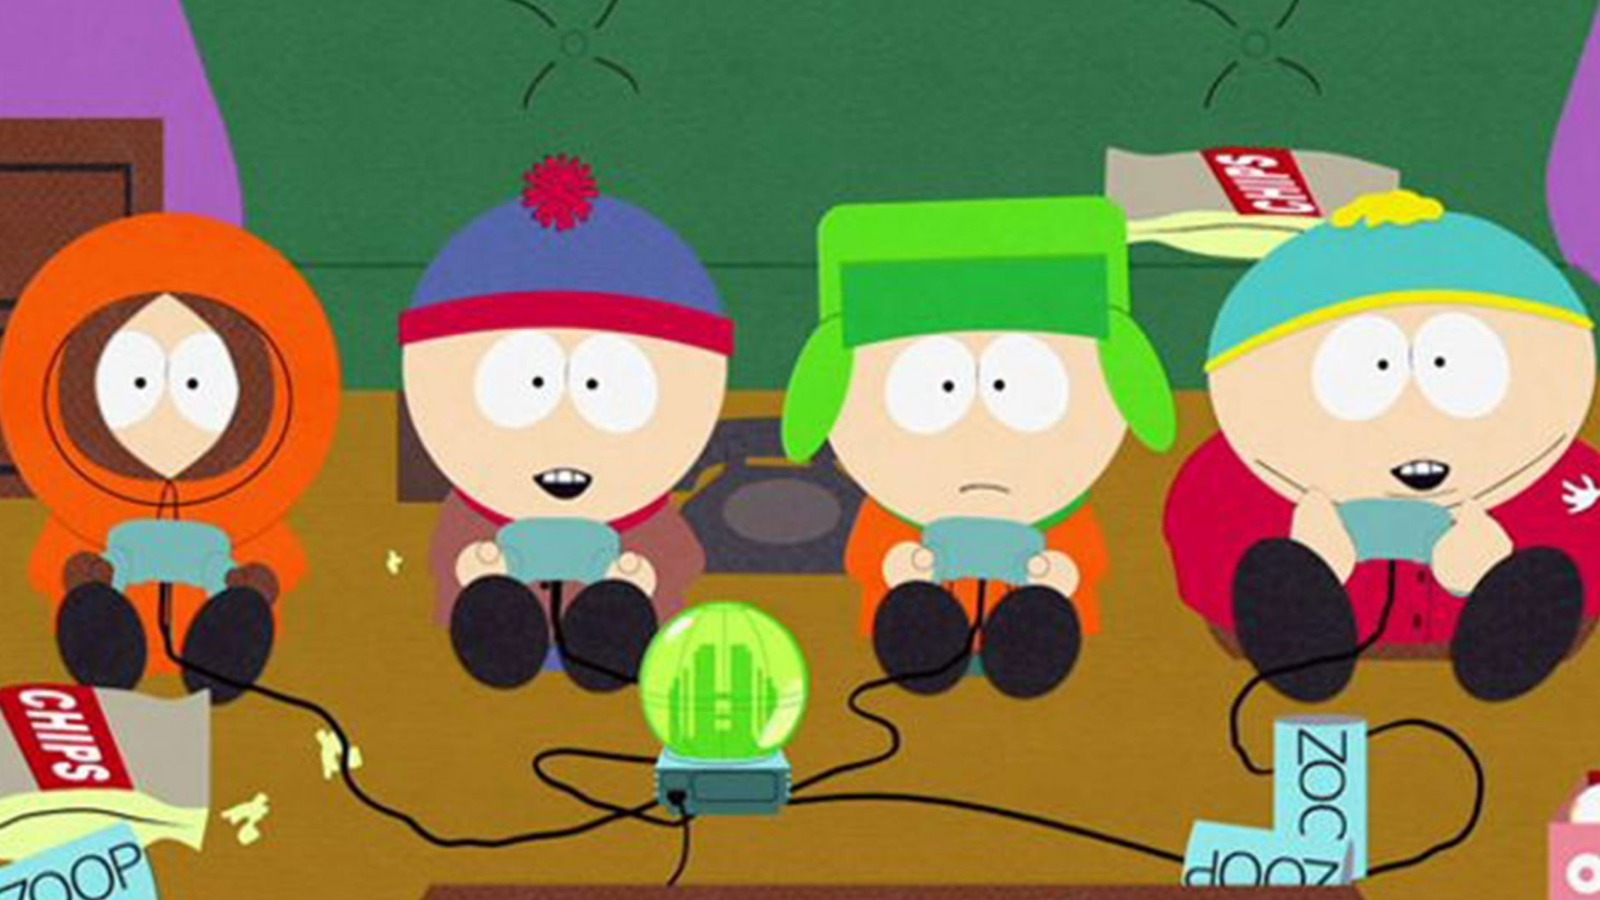 5 Movies from 'South Park' Creators You Might Have Missed